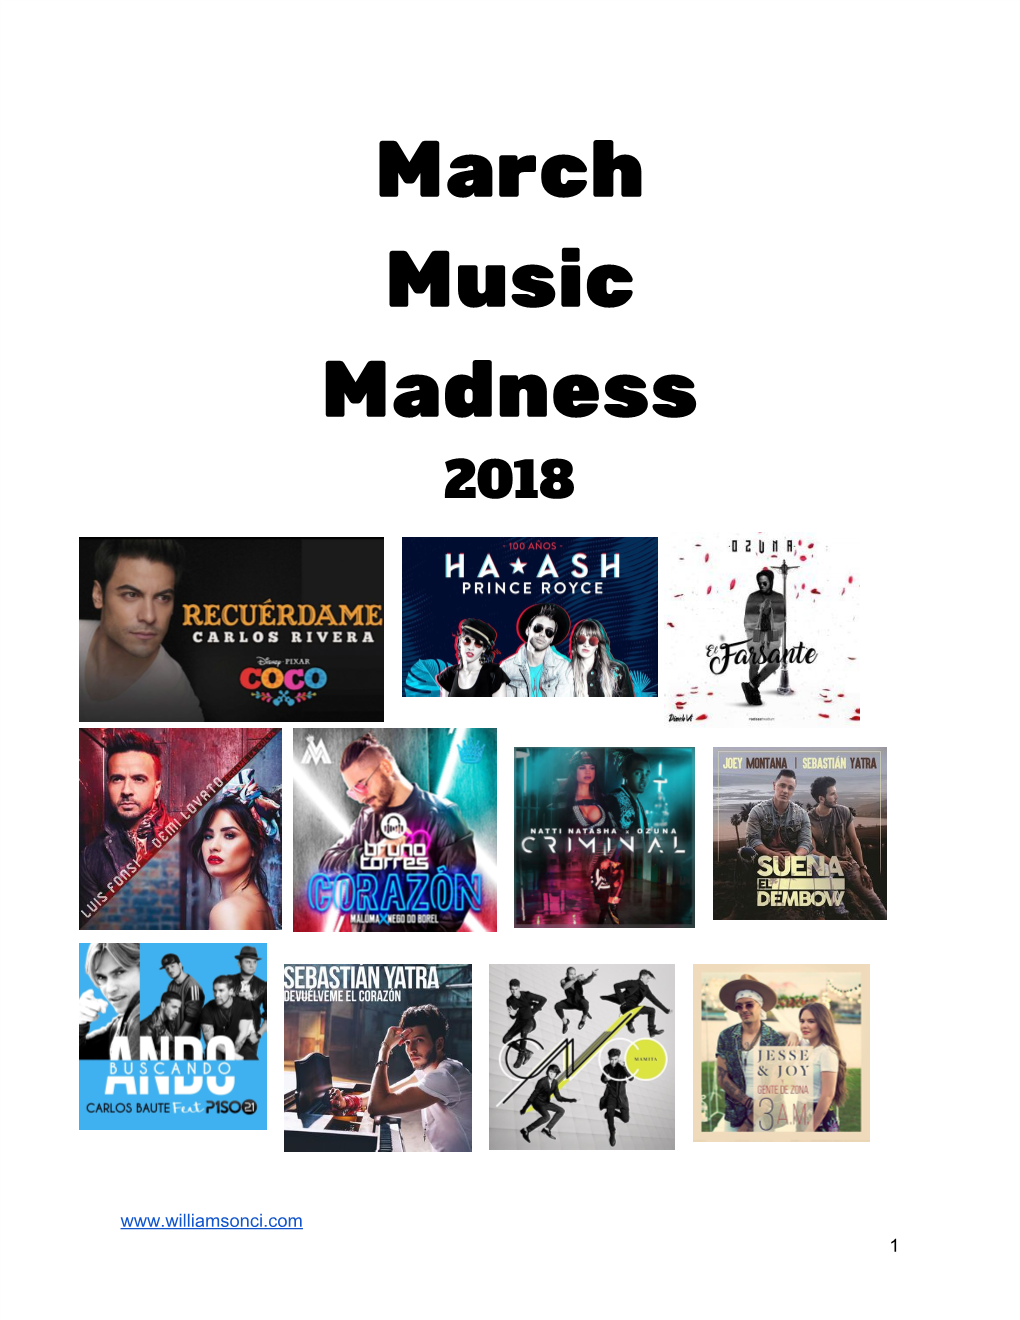 March Music Madness 2018